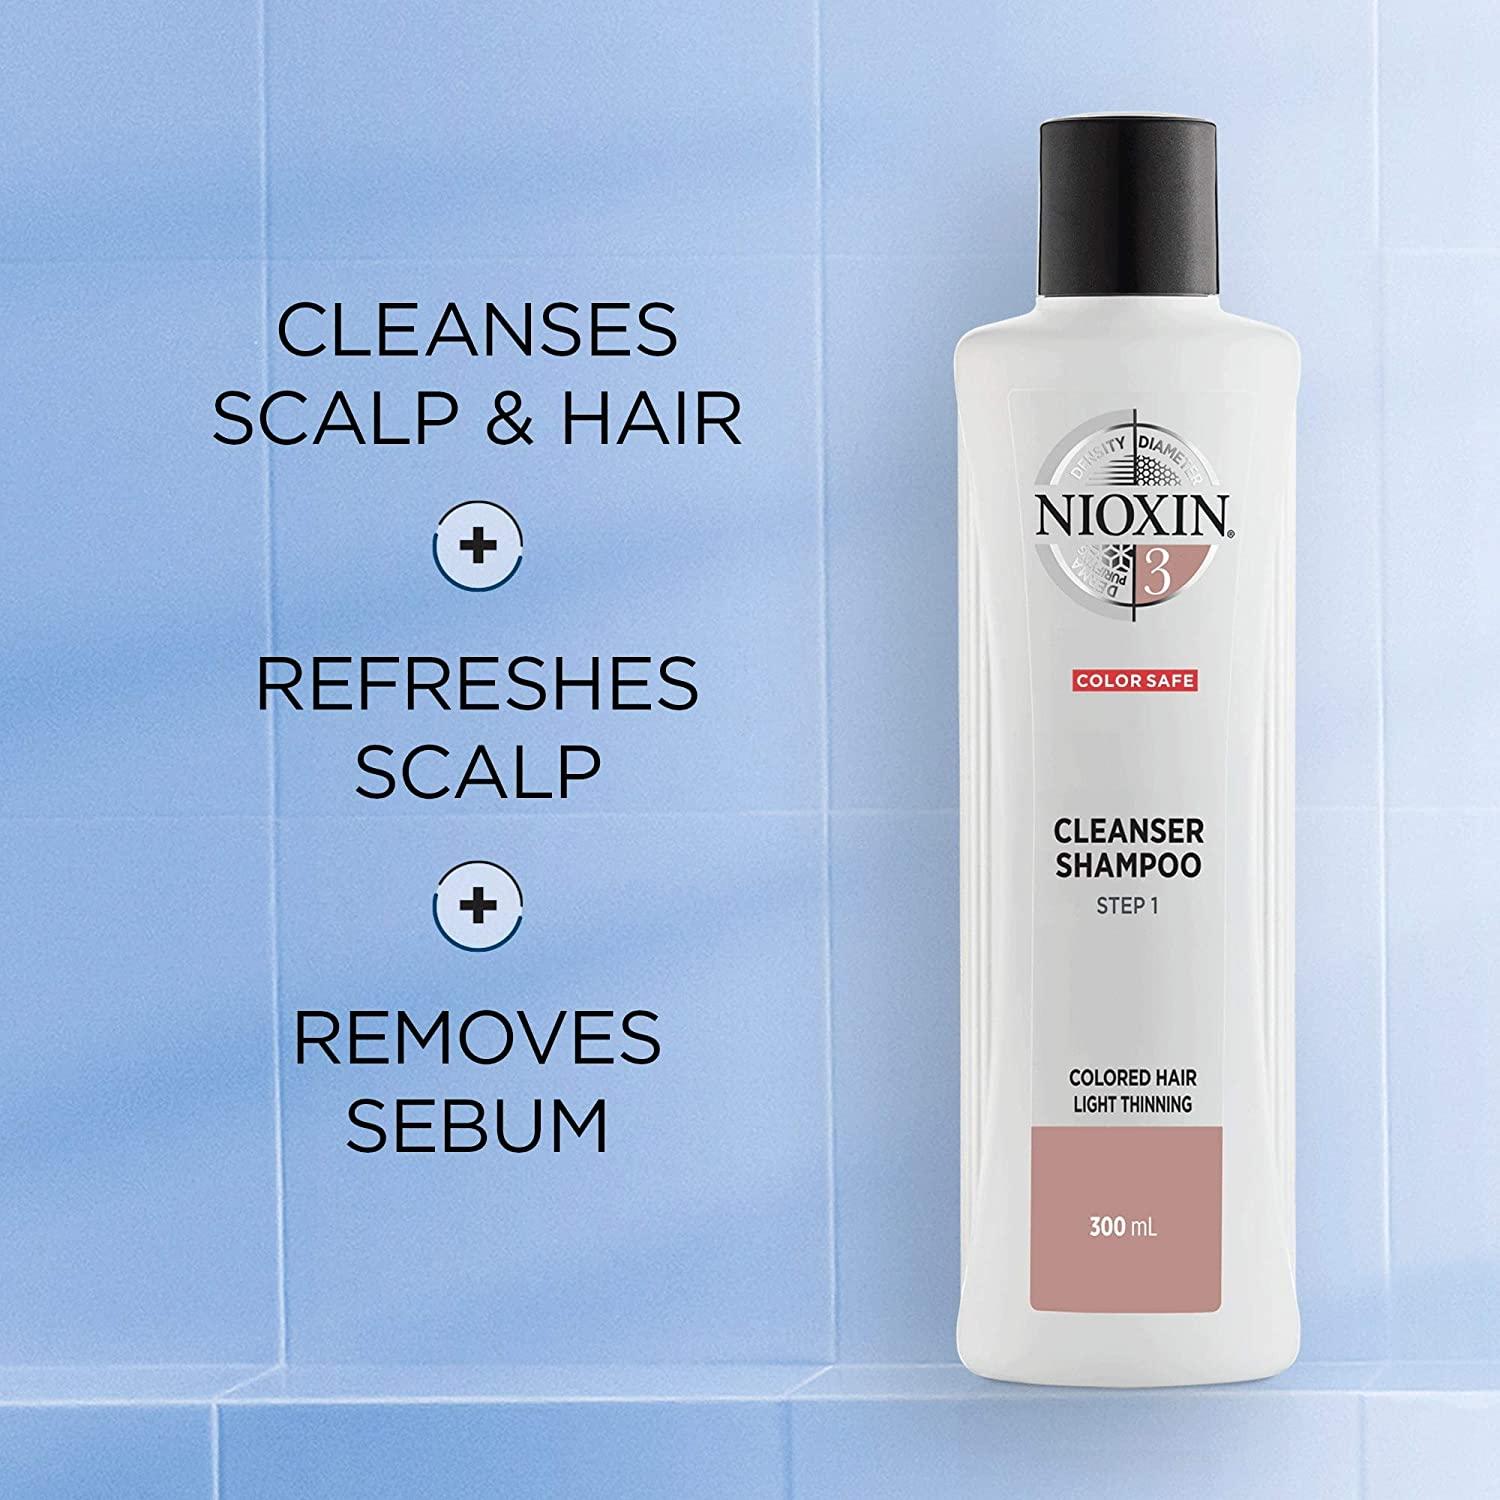 Nioxin System 3 Cleanser Shampoo, Color Treated Hair with Light Thinning,   oz